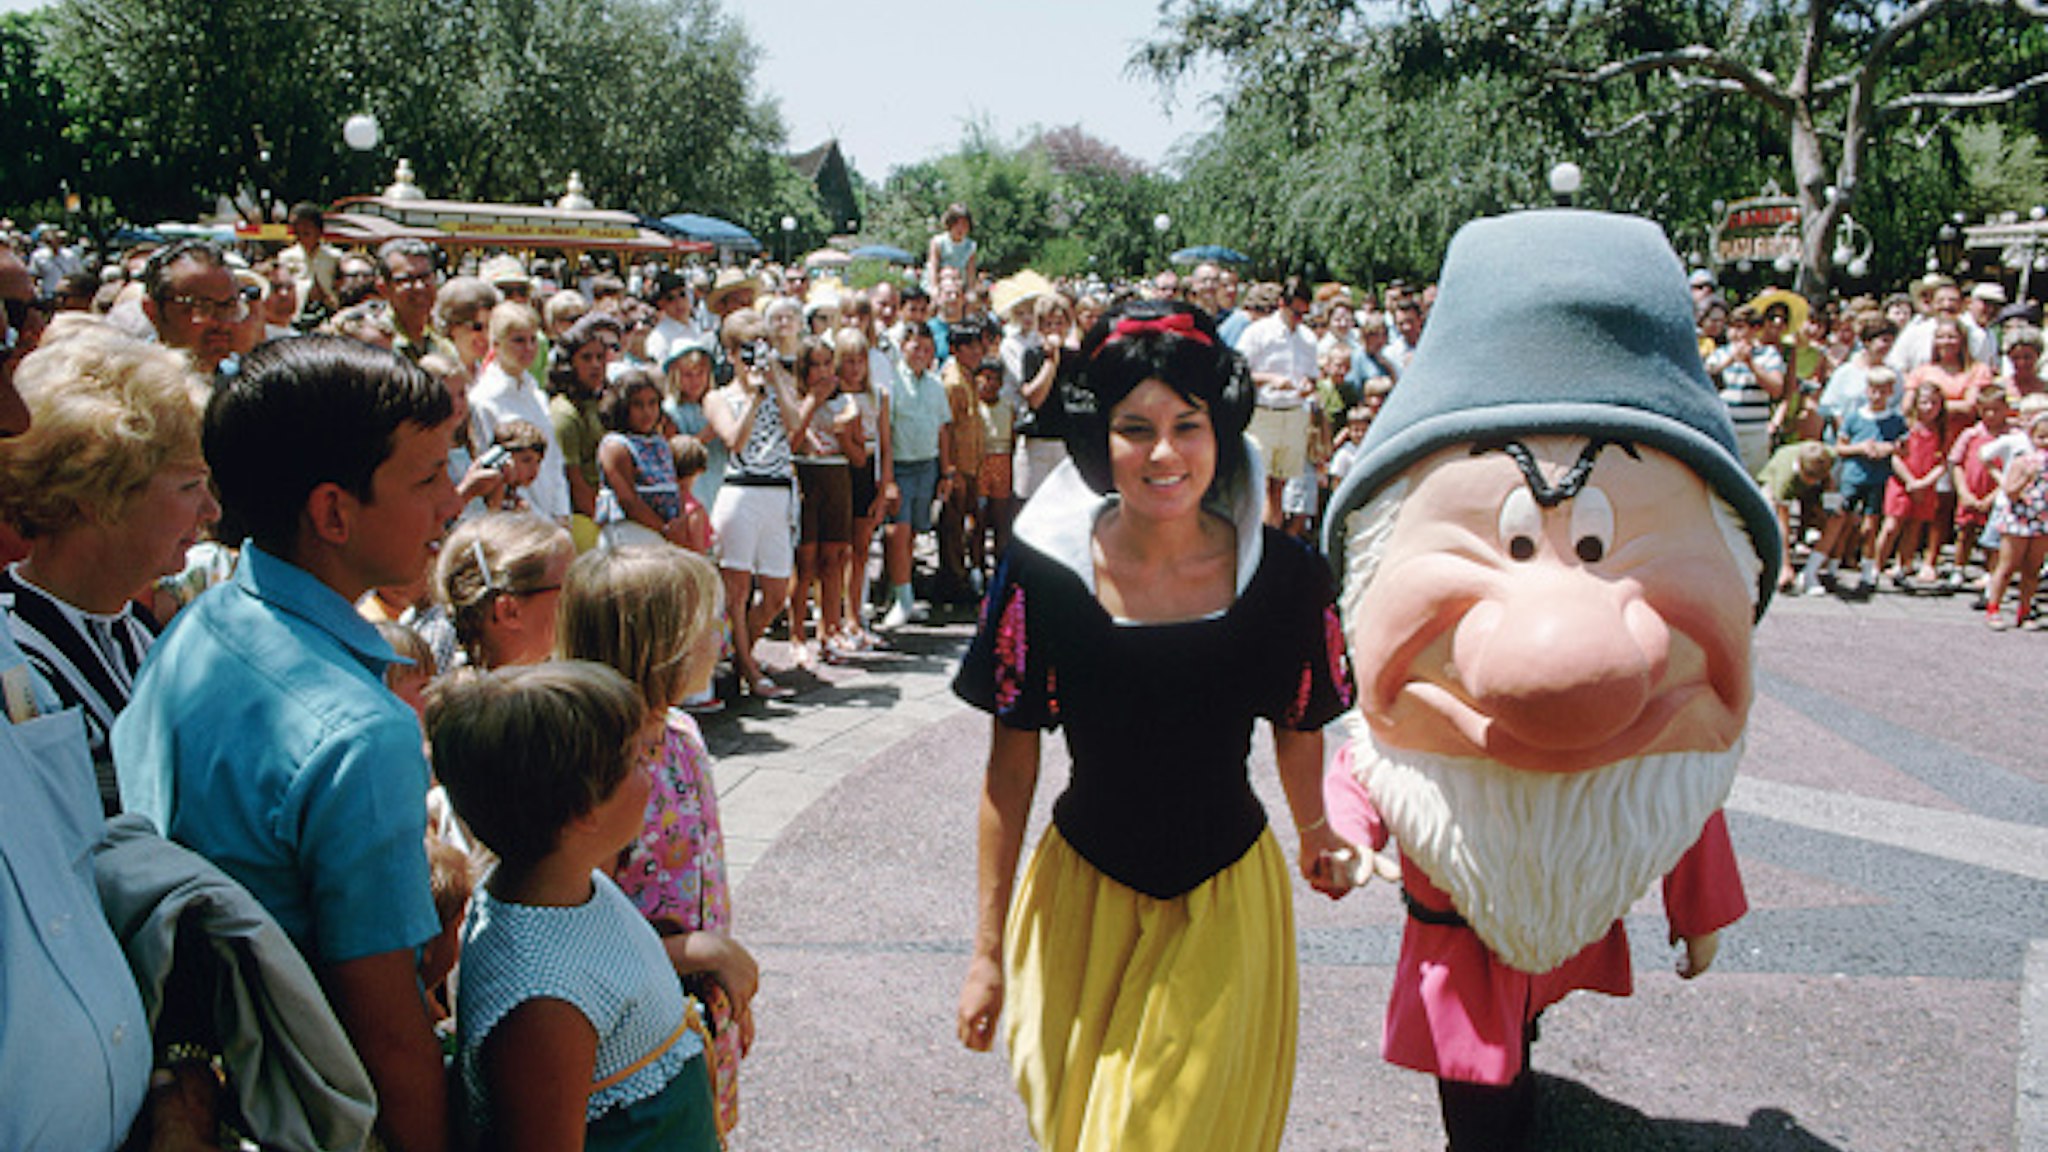 A crowd gathers to watch Snow White and Grumpy on a sunny day at Disneyland. Anaheim, California, 1969